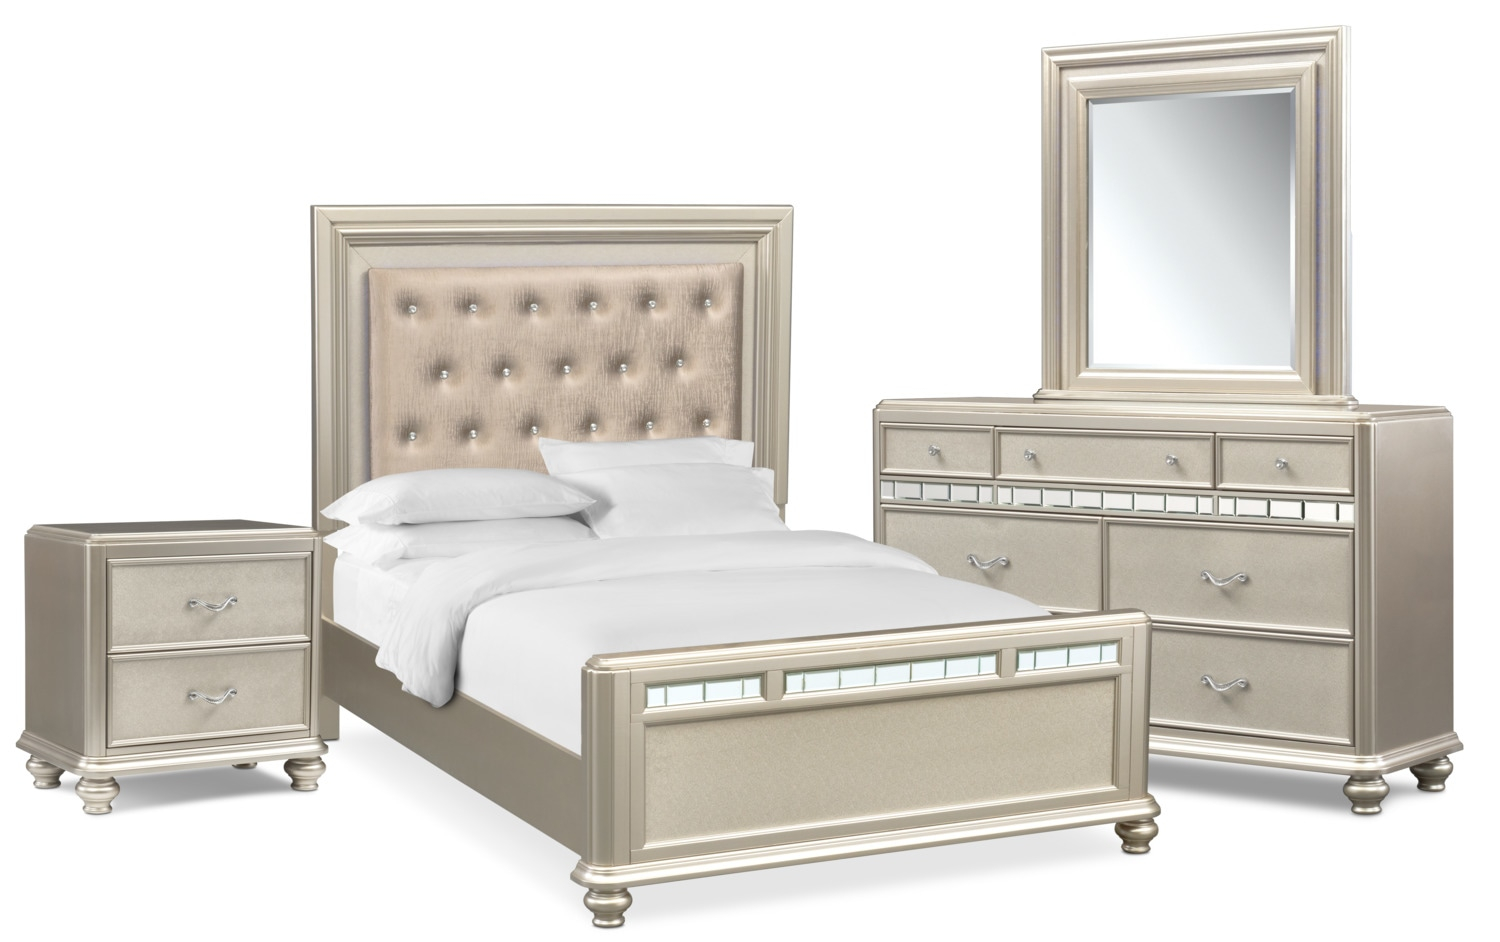 Sabrina 6 Piece Bedroom Set With Nightstand Dresser And Mirror inside sizing 1500 X 942